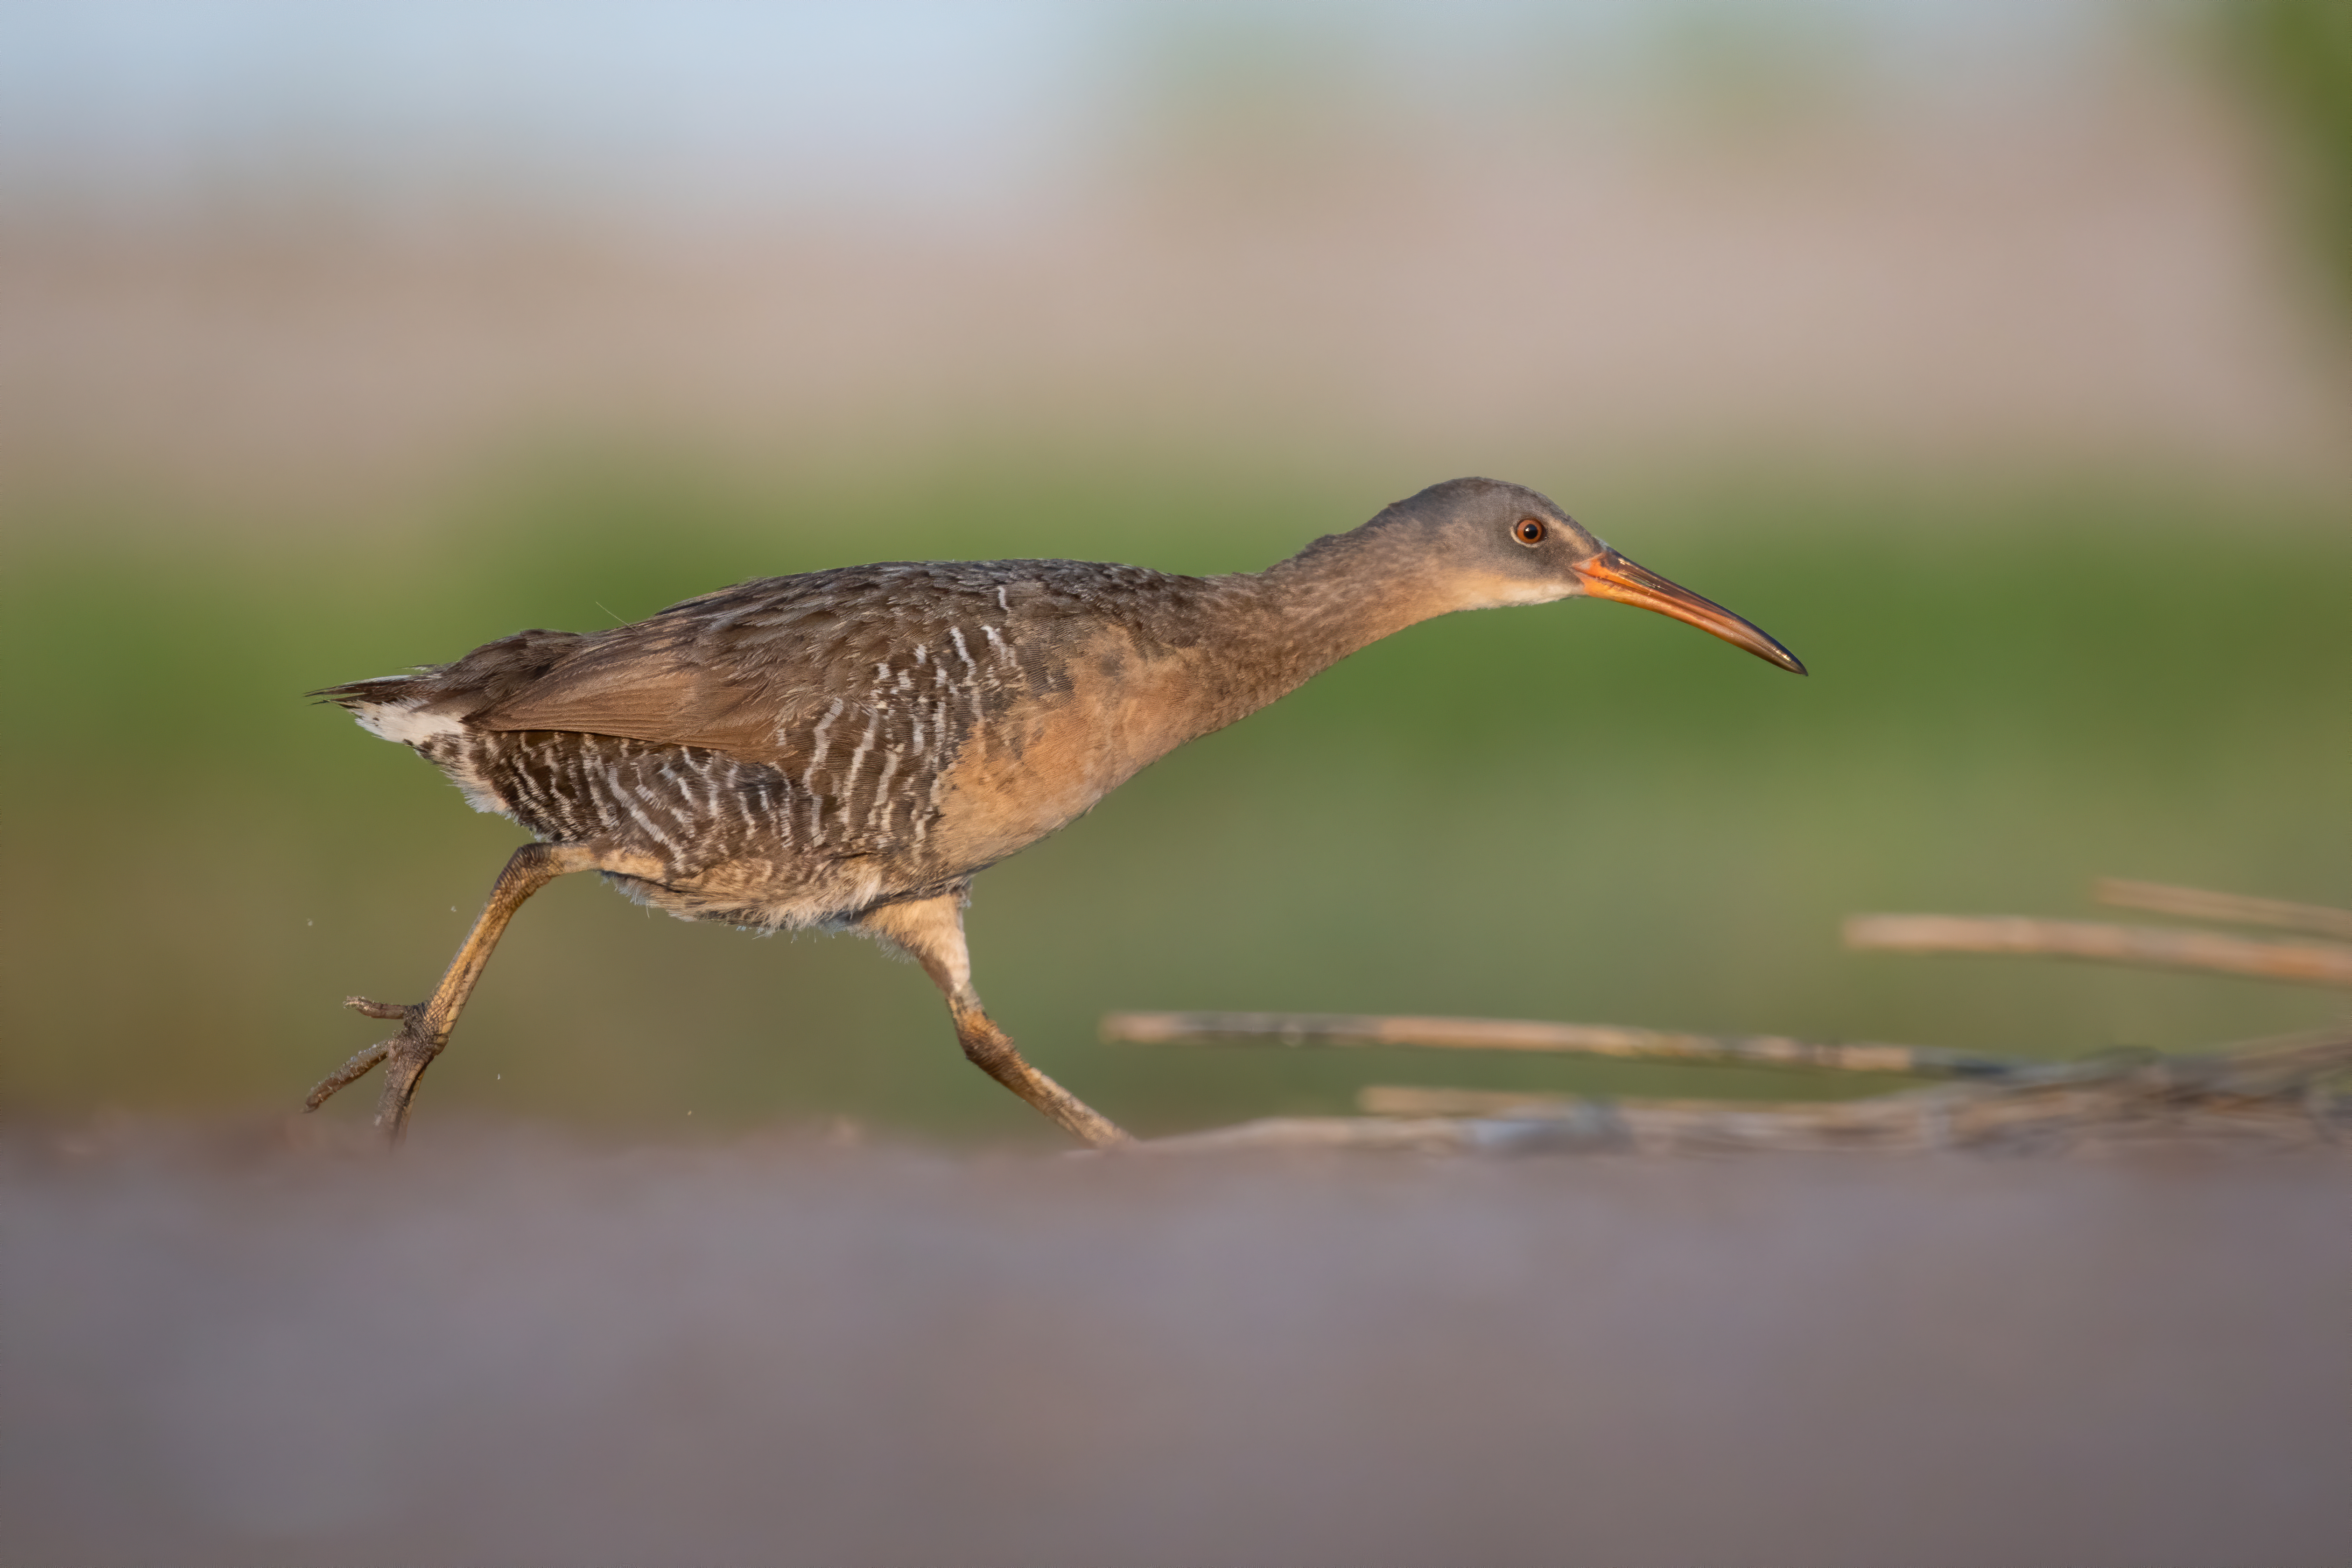 A bird with short legs walking on the ground.